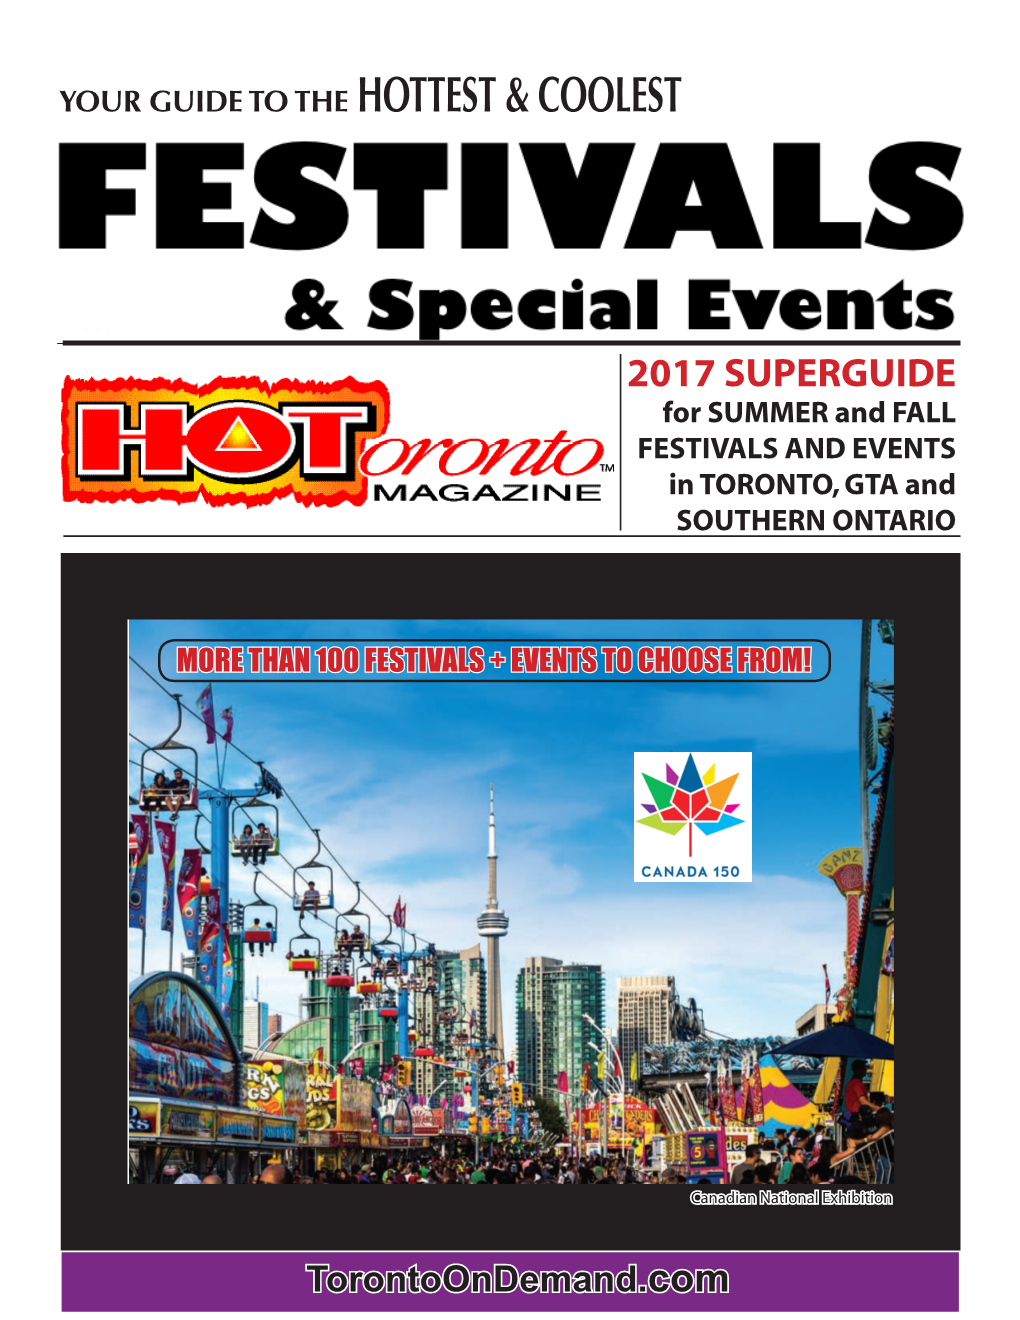 2017 SUPERGUIDE for SUMMER and FALL FESTIVALS and EVENTS in TORONTO, GTA and SOUTHERN ONTARIO